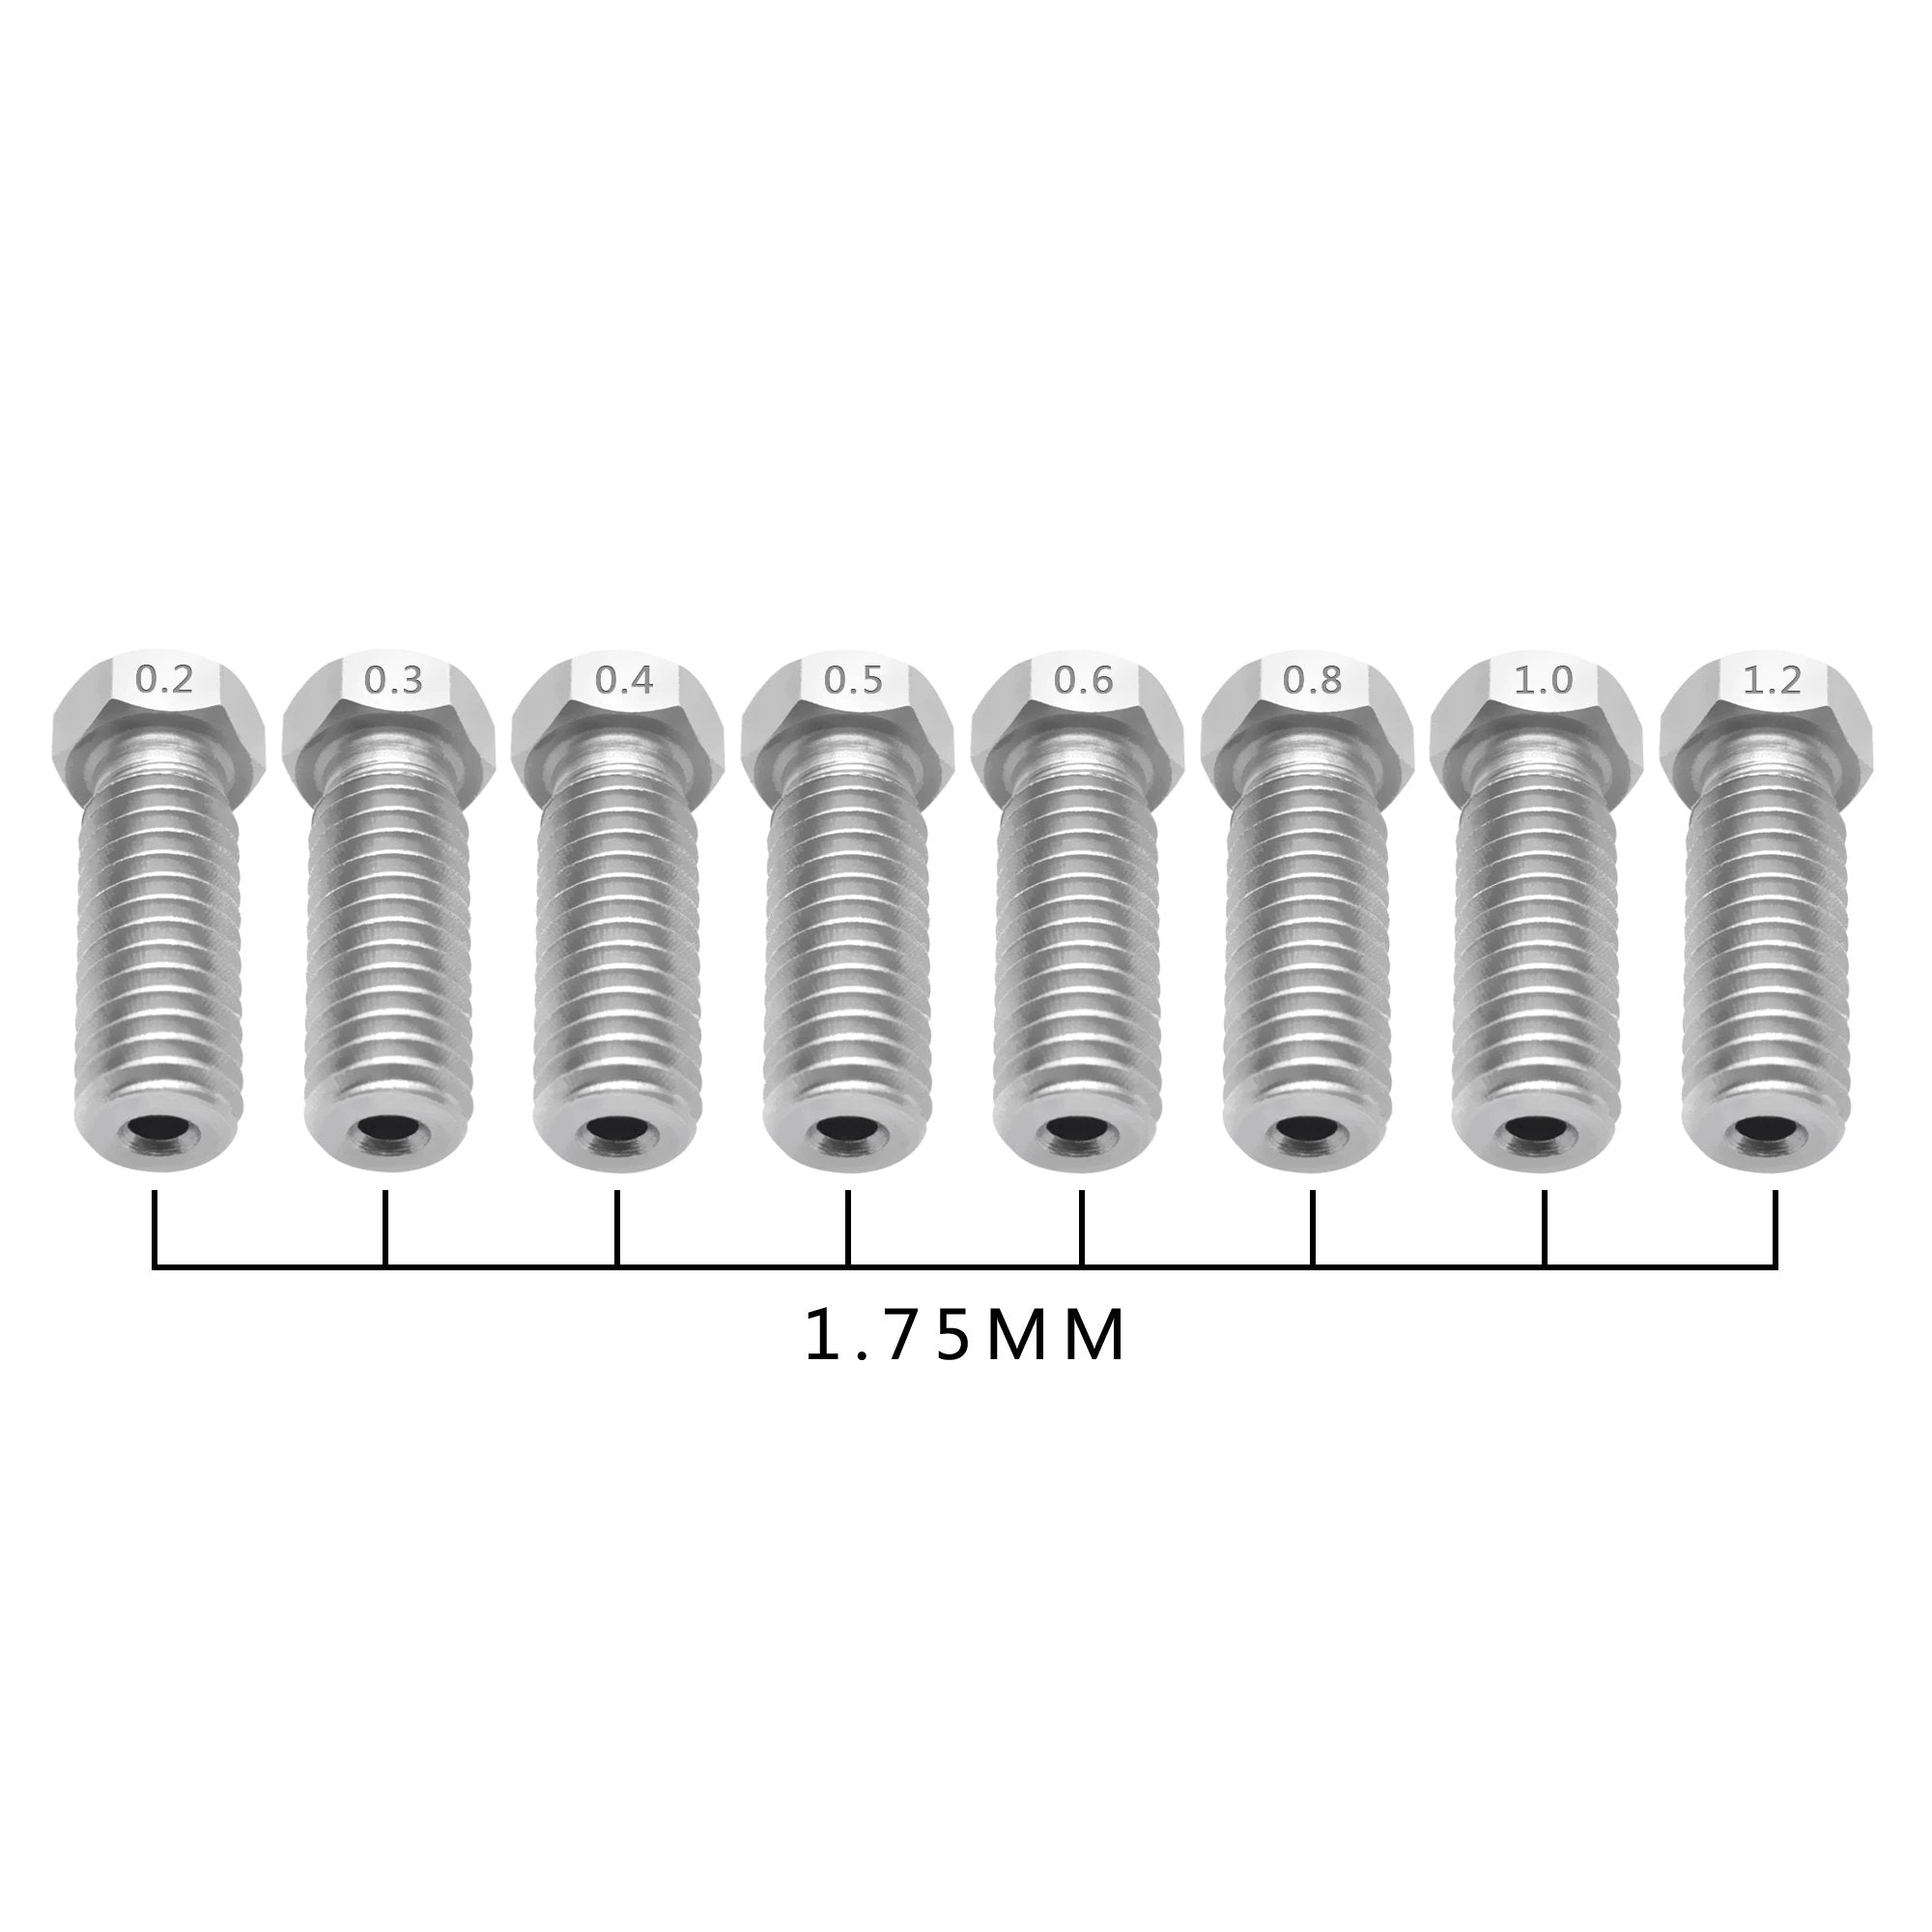 8pcs All-Metal Stainless Steel Volcano Nozzle M6 Thread Extra Length Nozzle 0.2-1.2mm